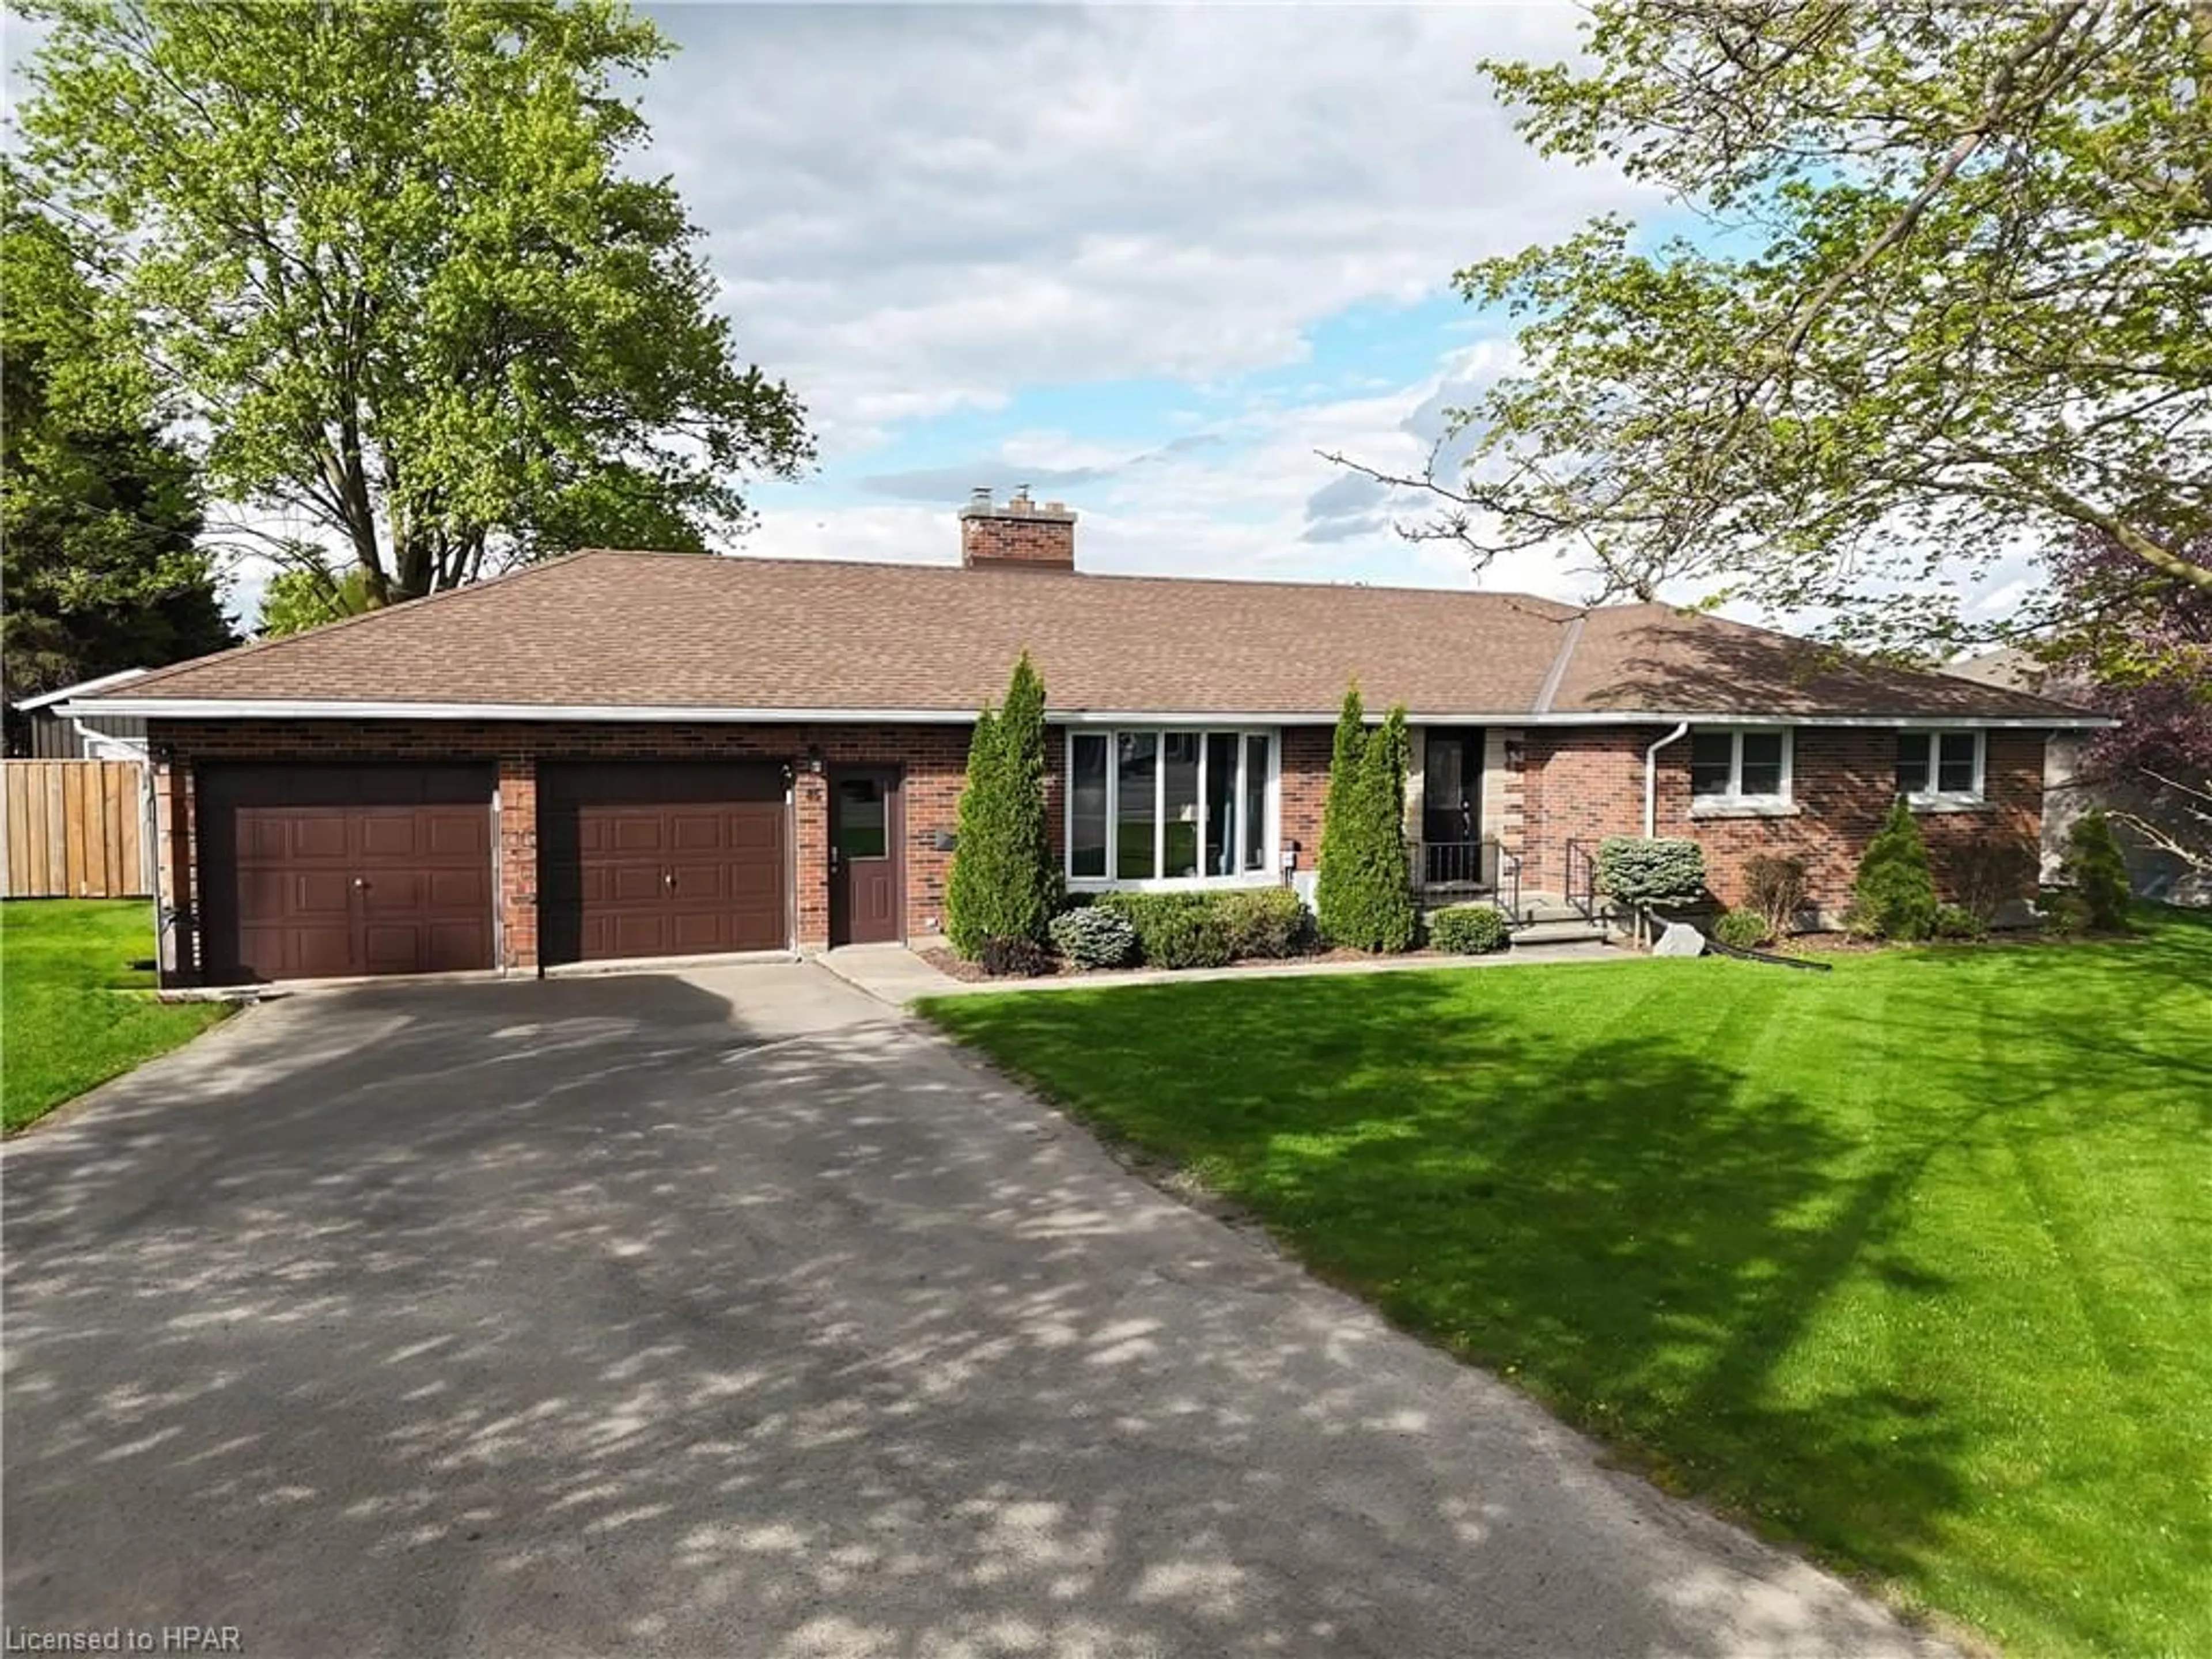 Home with brick exterior material for 85 Huron Rd, Mitchell Ontario N0K 1N0